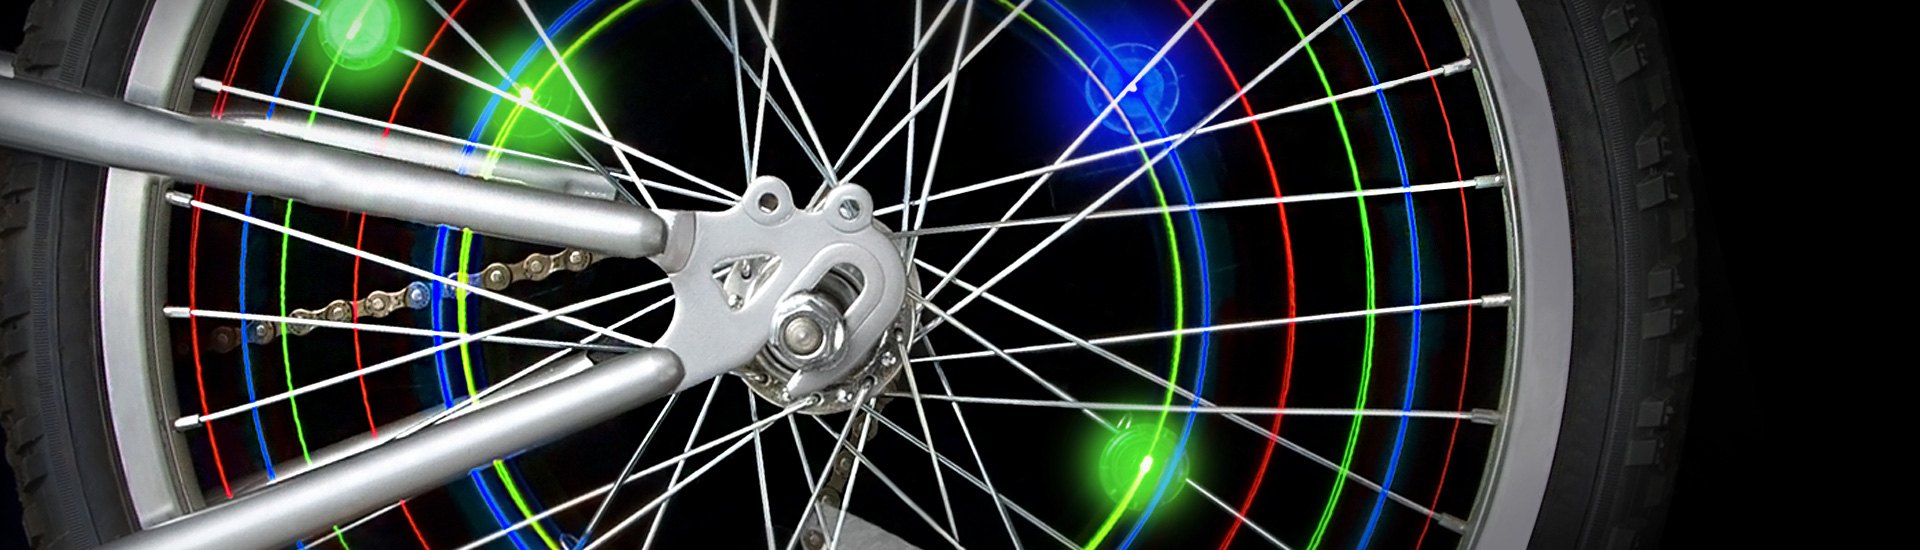 Bicycle Lights | For Your Safety, Helping You See and Be Seen